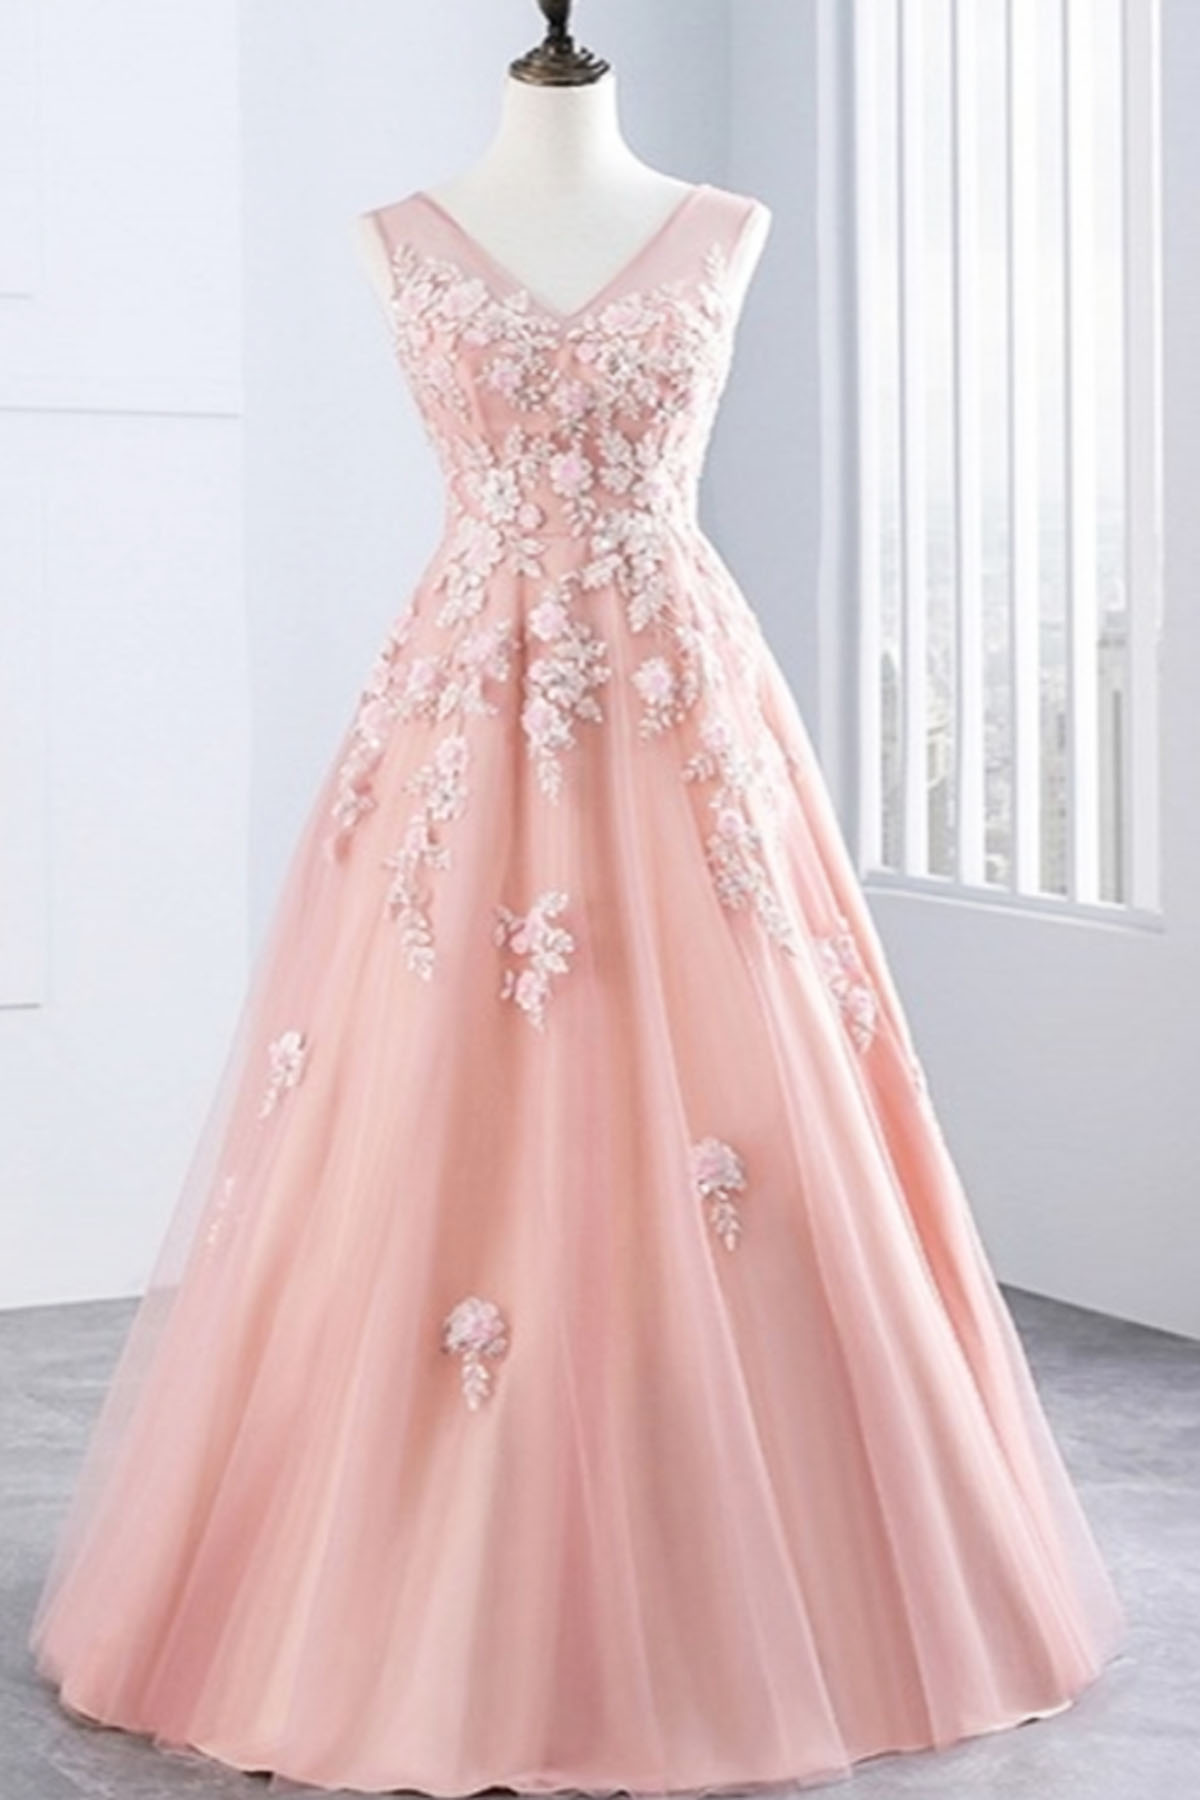 Elegant V Neck Lace Up Tulle Formal Prom Dress, Beautiful Long Prom Dress, Banquet Party Dress